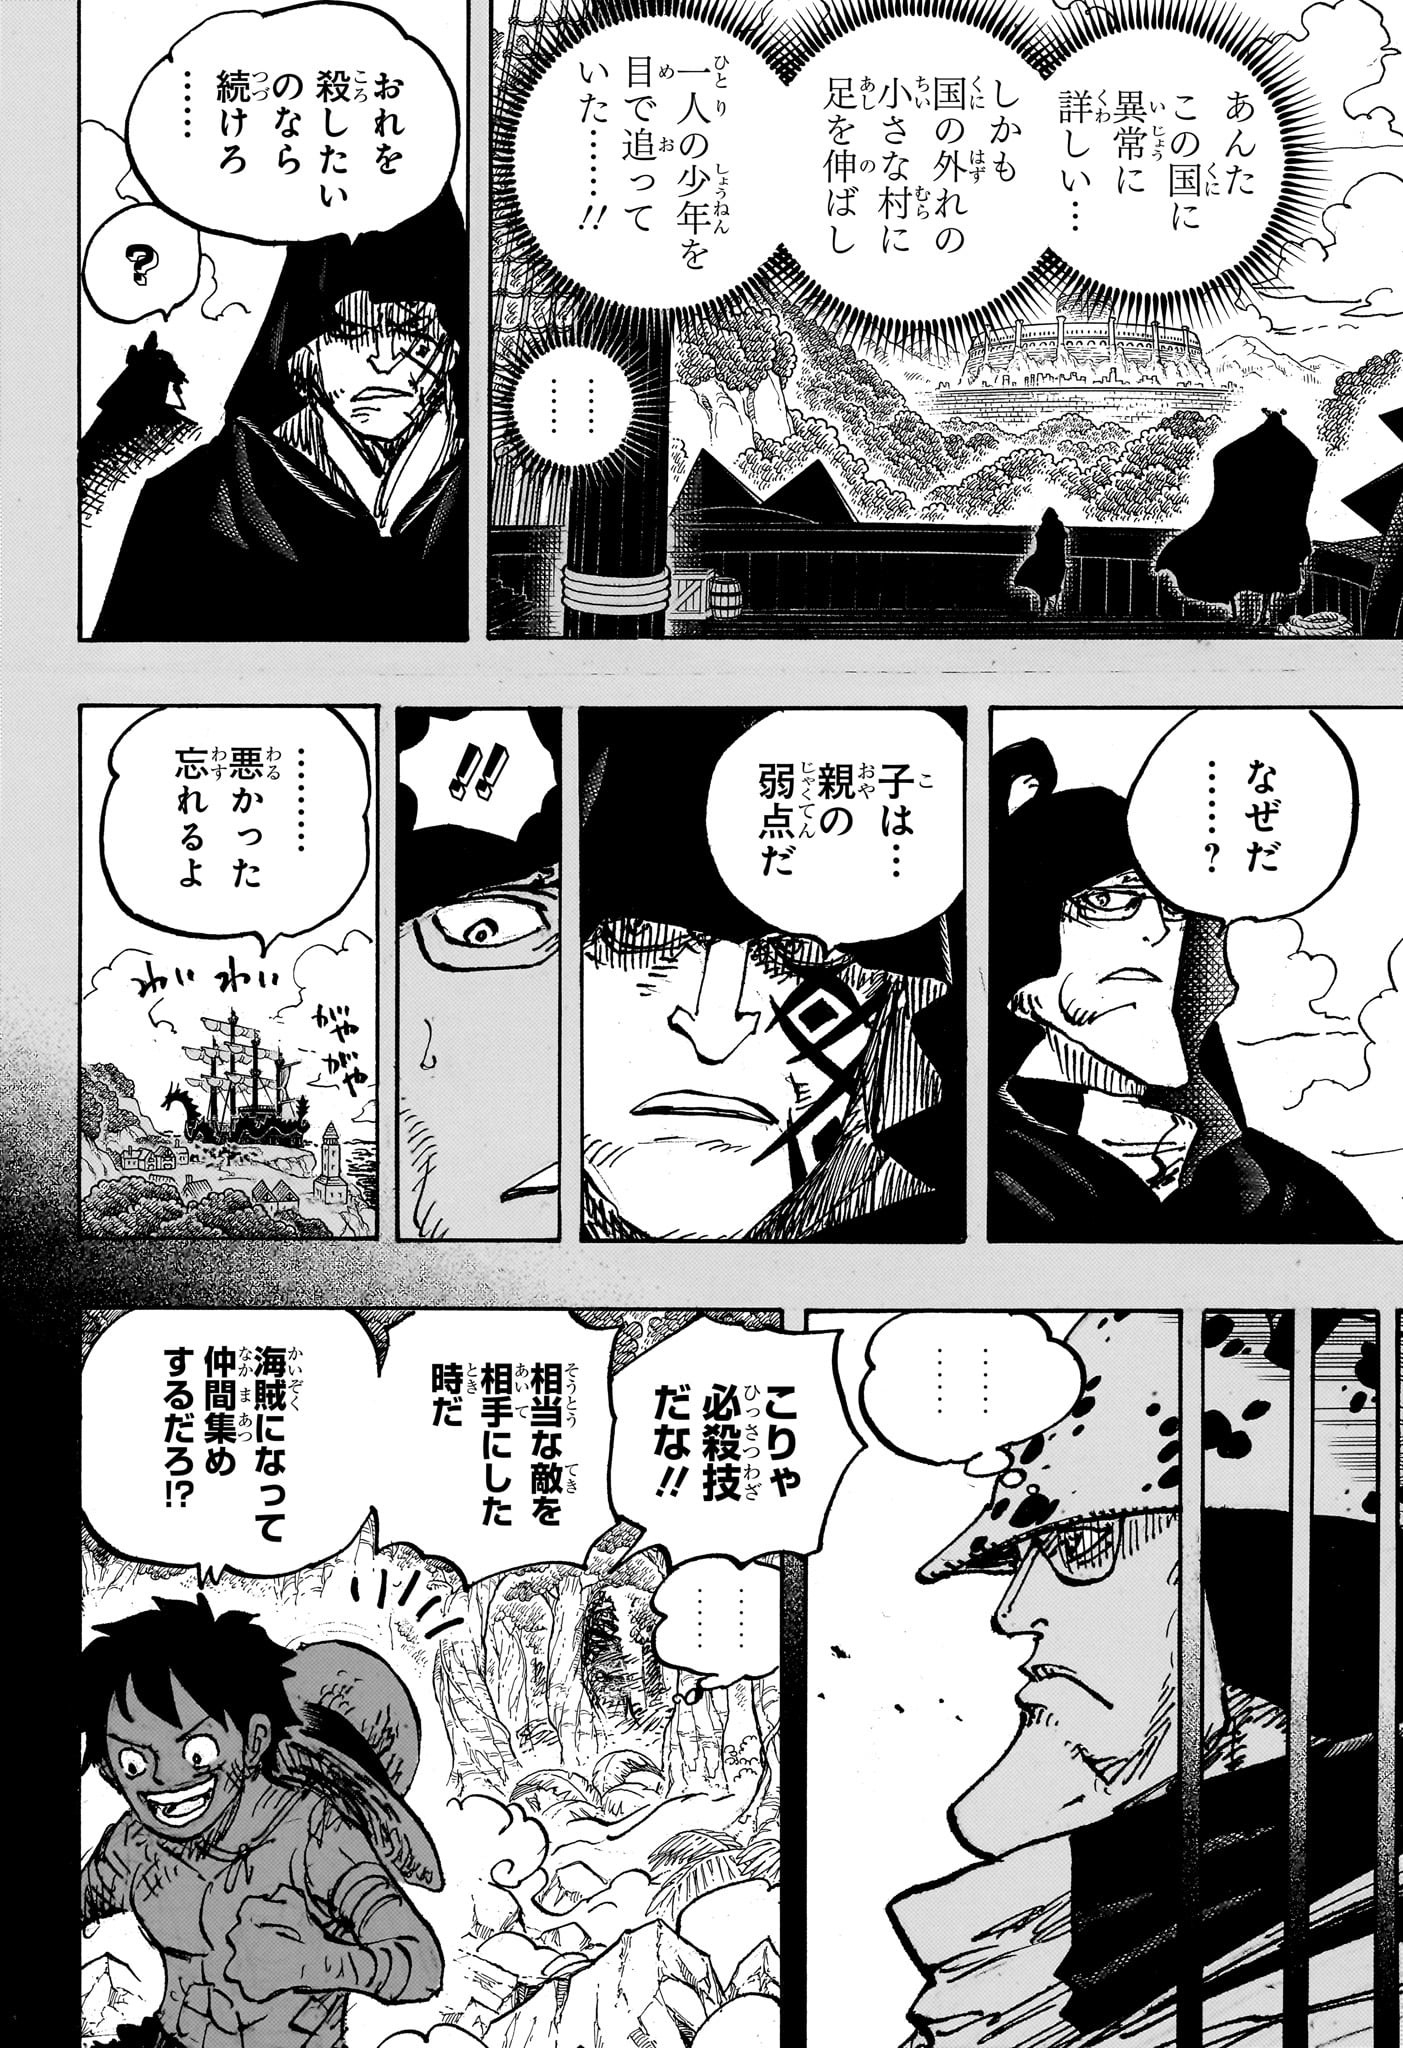 One Piece - Chapter 1101 - Page 2